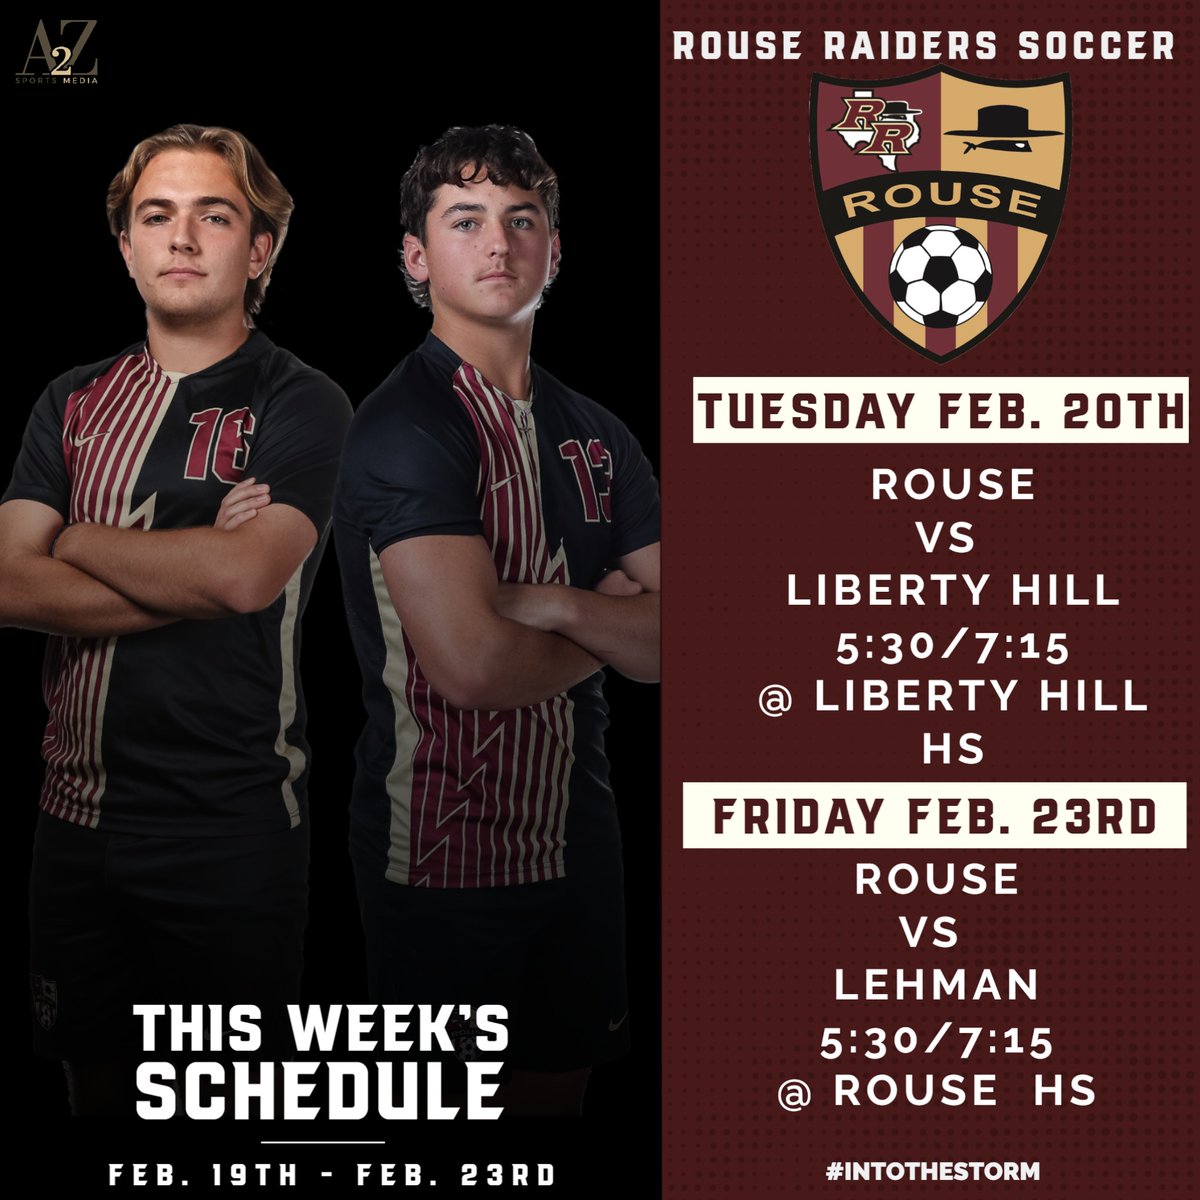 Game Week for @RouseSoccer @RouseScrBooster @DKnight111